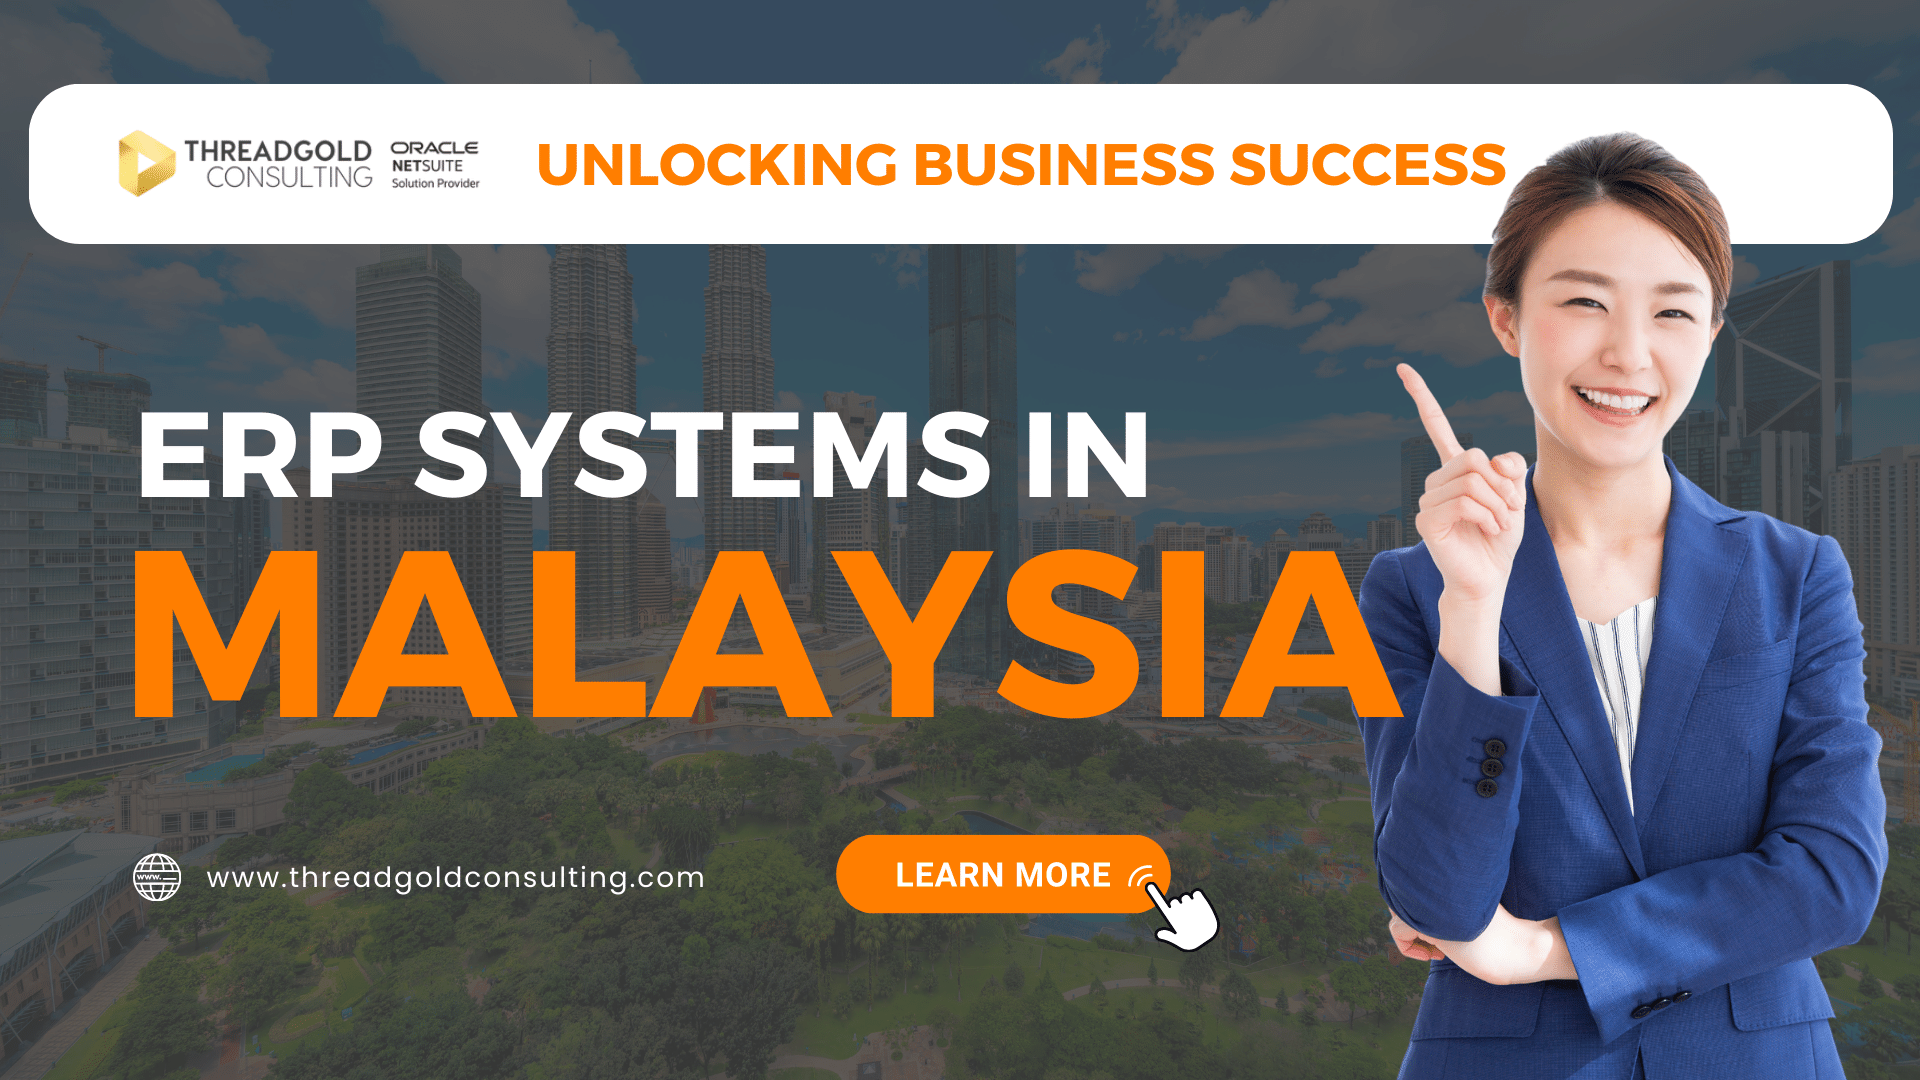 Unlocking Business Success with ERP Systems in Malaysia